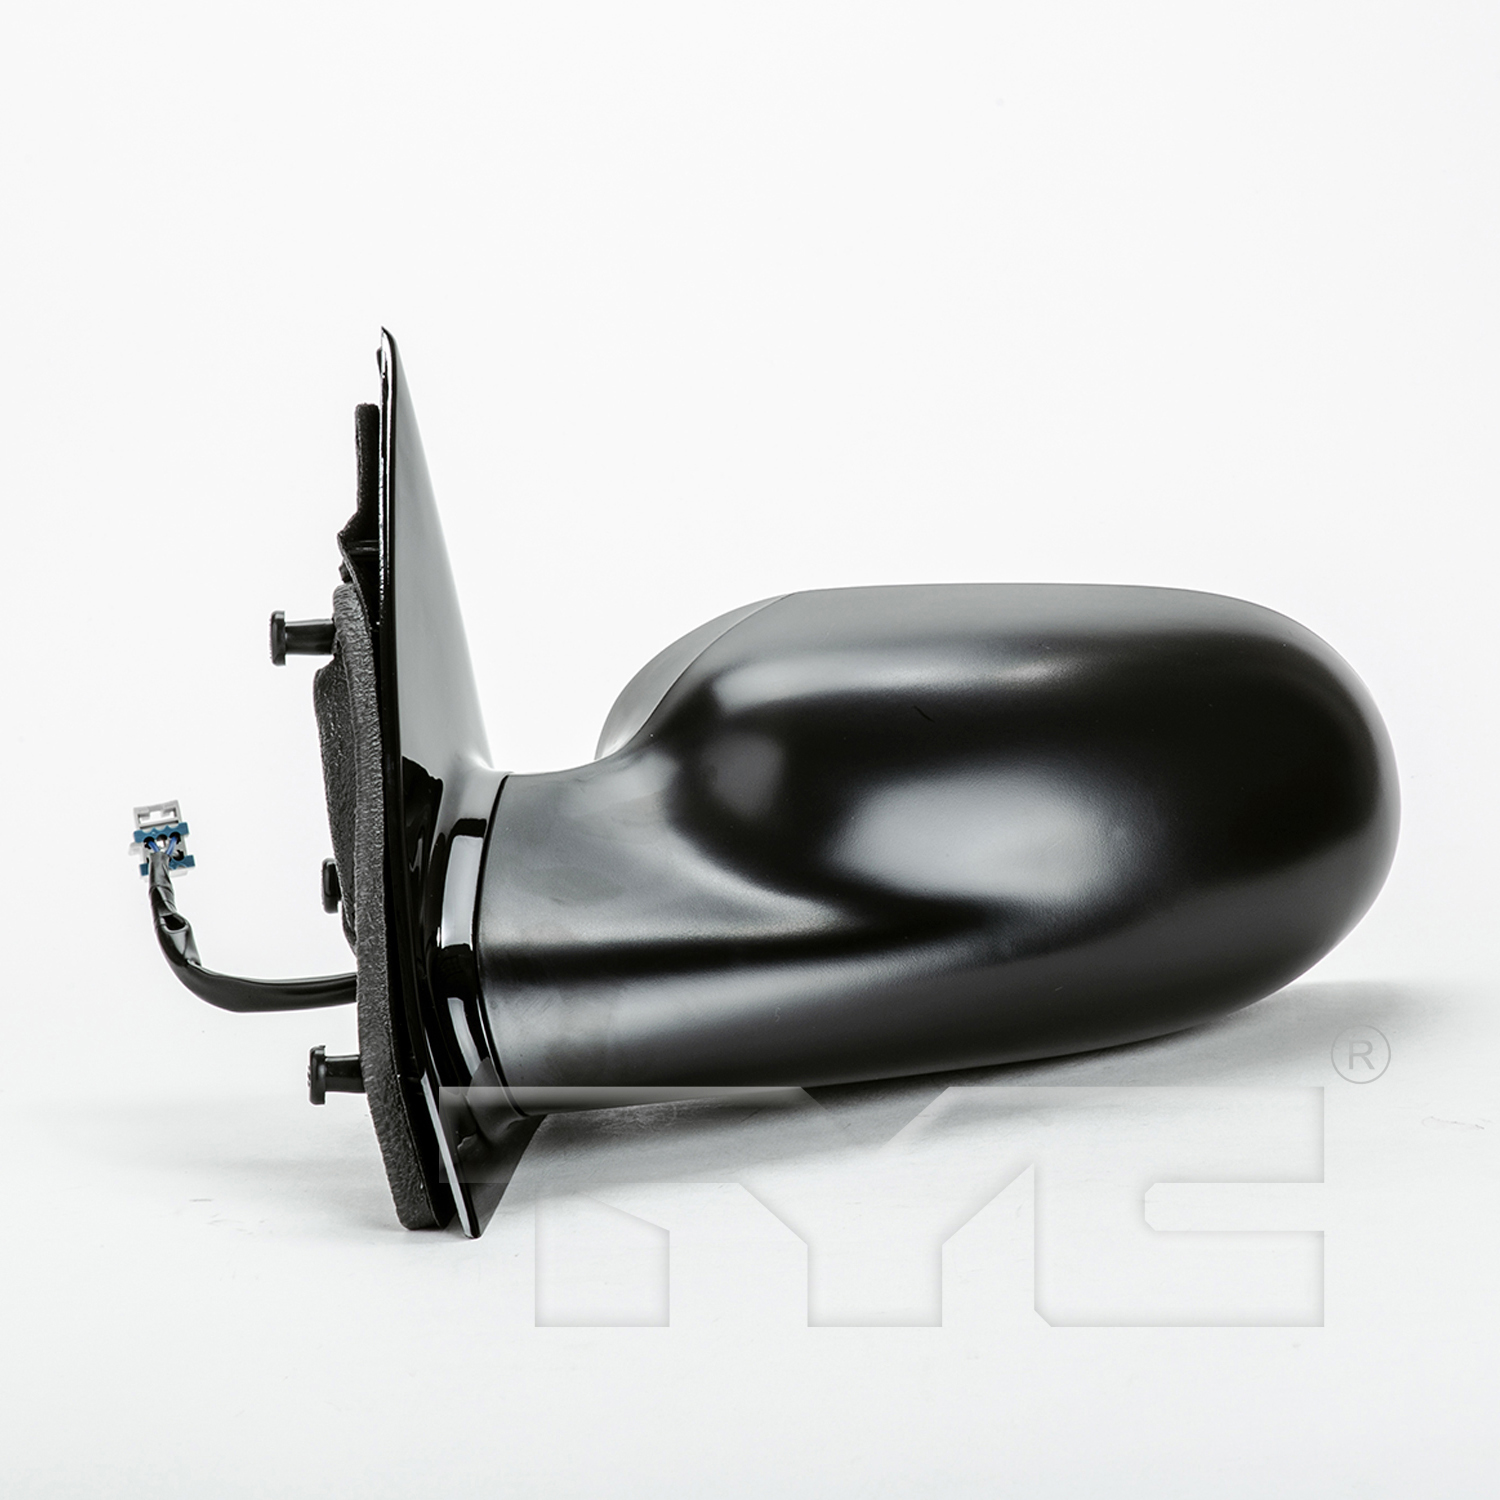 Aftermarket MIRRORS for SATURN - L300, L300,04-05,LT Mirror outside rear view